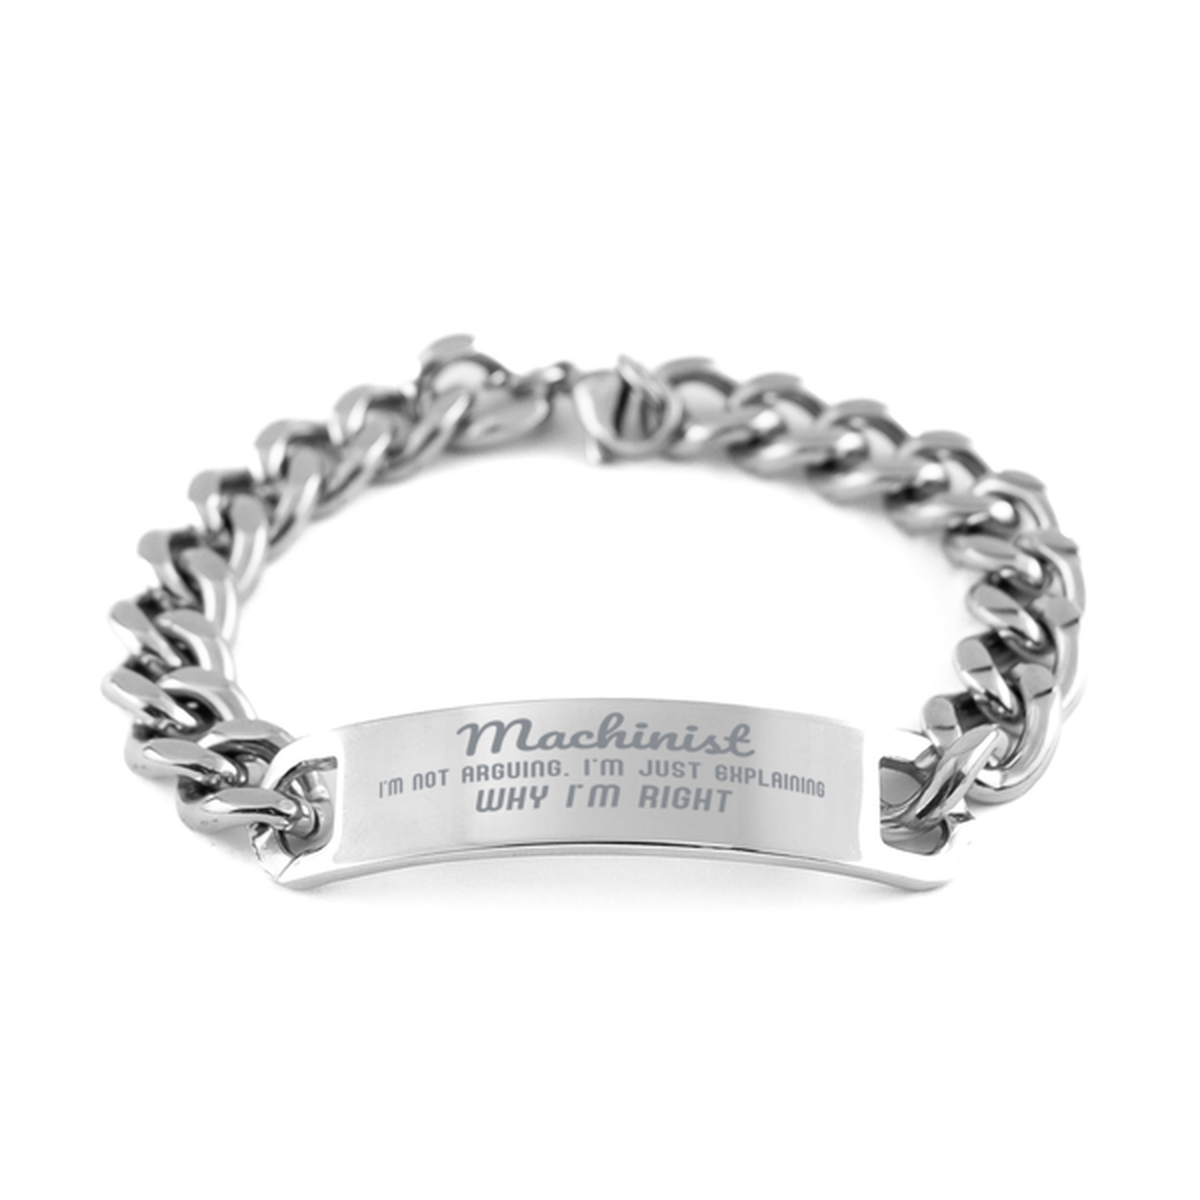 Machinist I'm not Arguing. I'm Just Explaining Why I'm RIGHT Cuban Chain Stainless Steel Bracelet, Graduation Birthday Christmas Machinist Gifts For Machinist Funny Saying Quote Present for Men Women Coworker